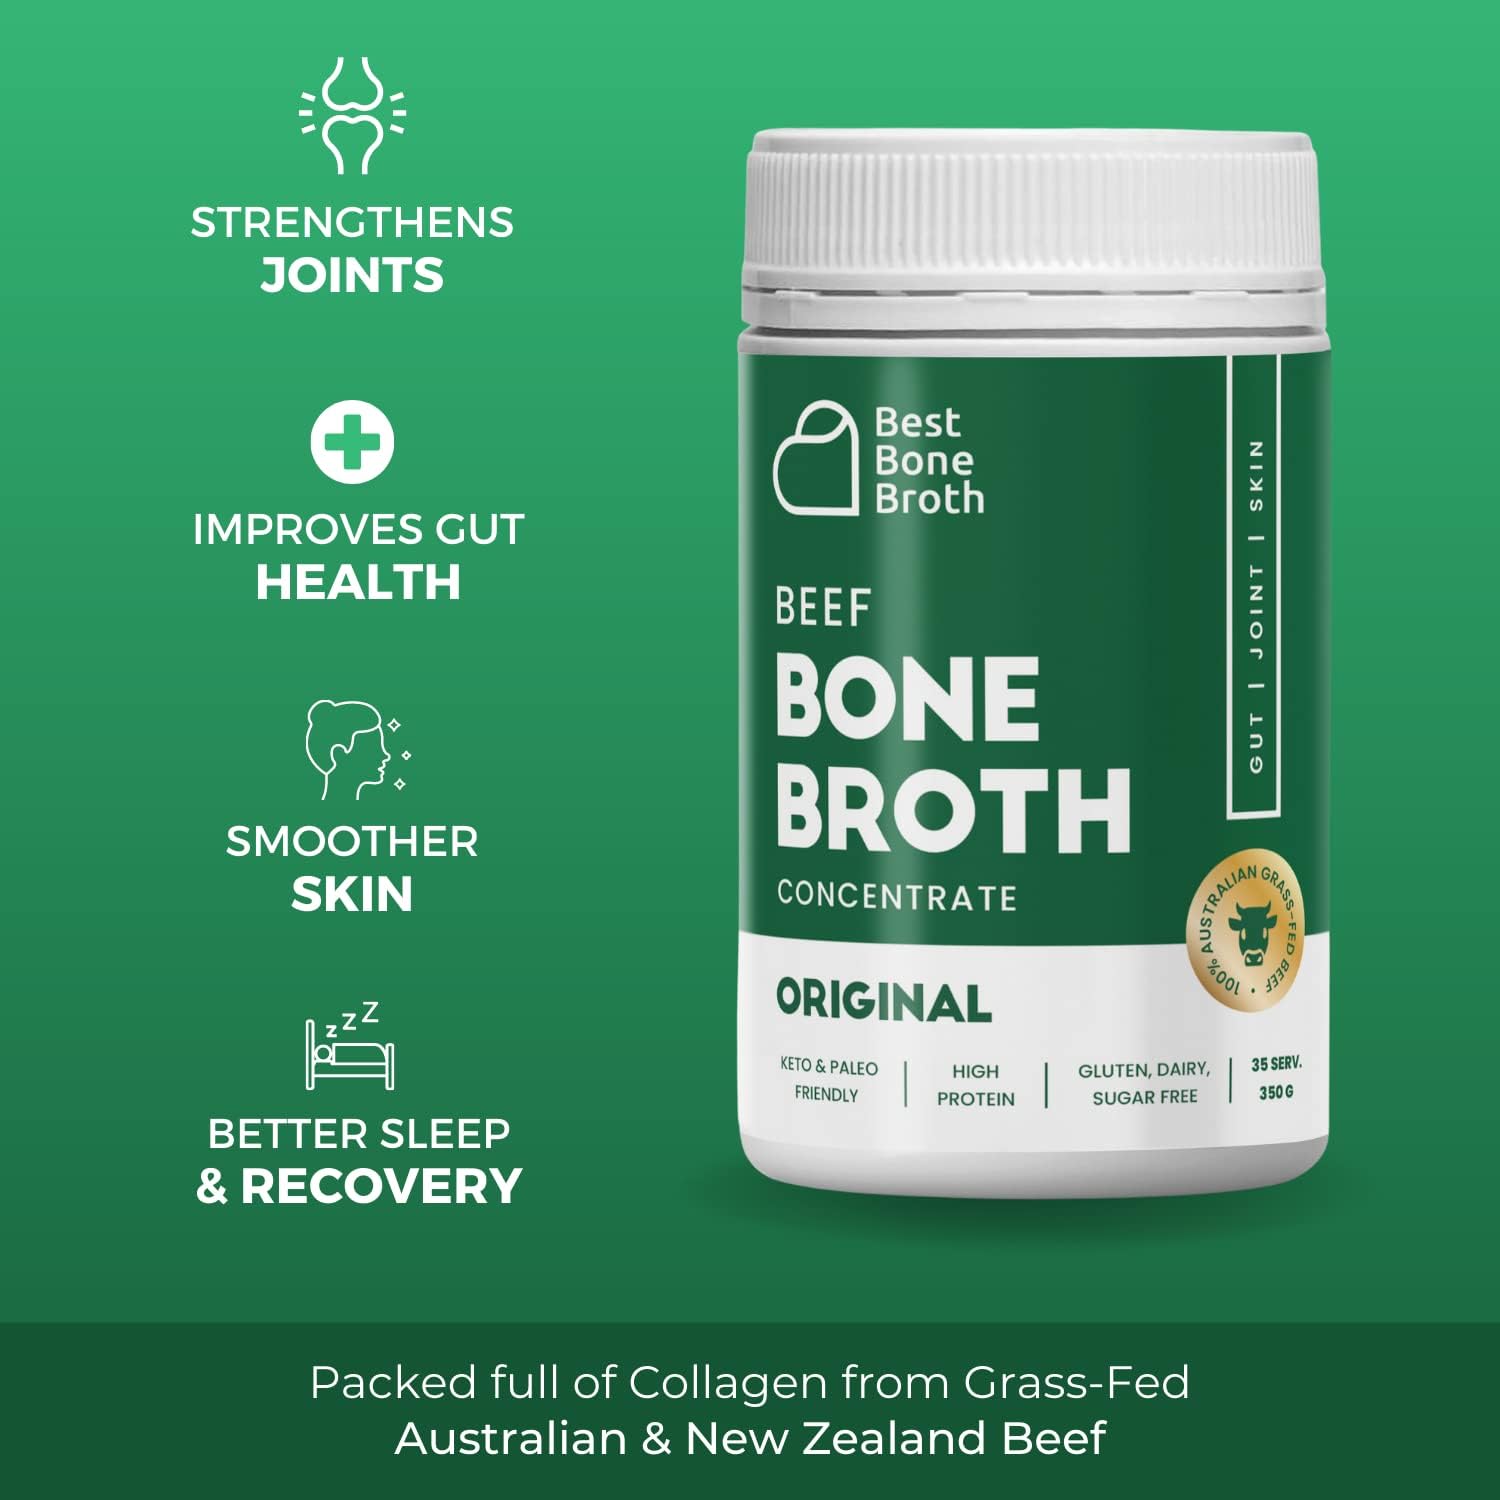 Best Bone Broth - Beef Bone Broth Concentrate - Review of Benefits